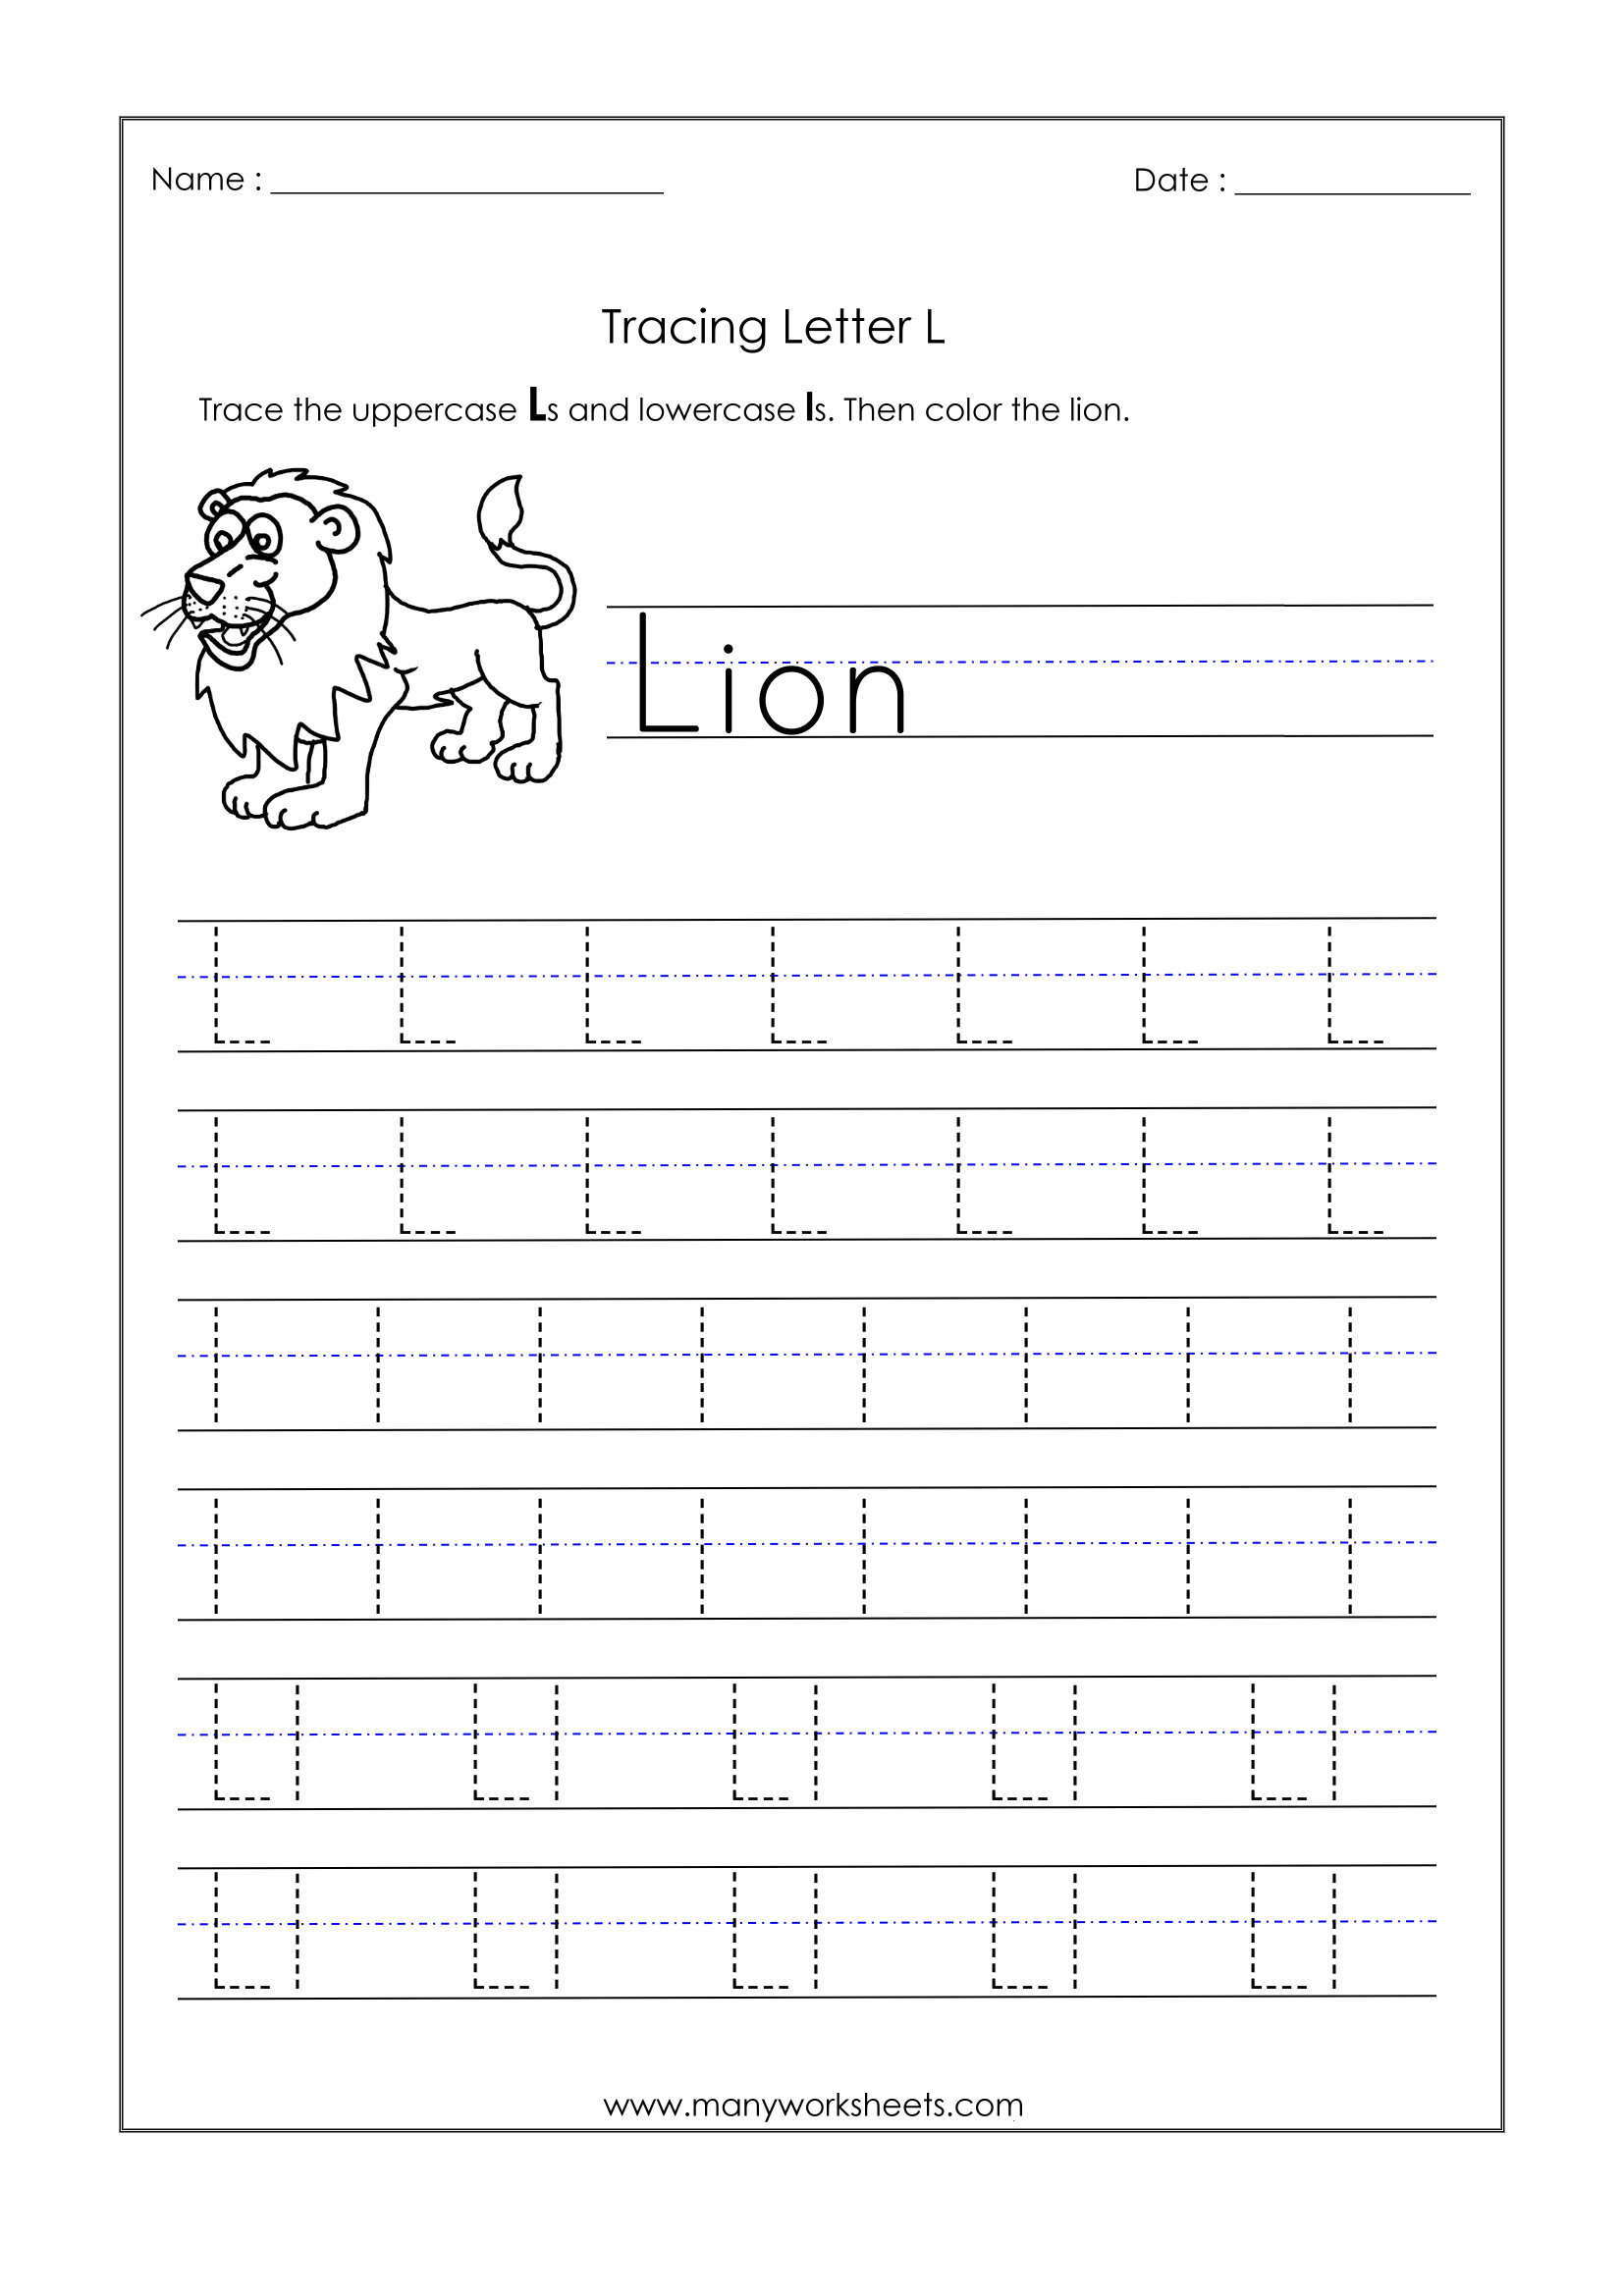 Letter Tracingsheets Incredible Image Ideas L Foren Trace with Letter Ll Worksheets For Kindergarten